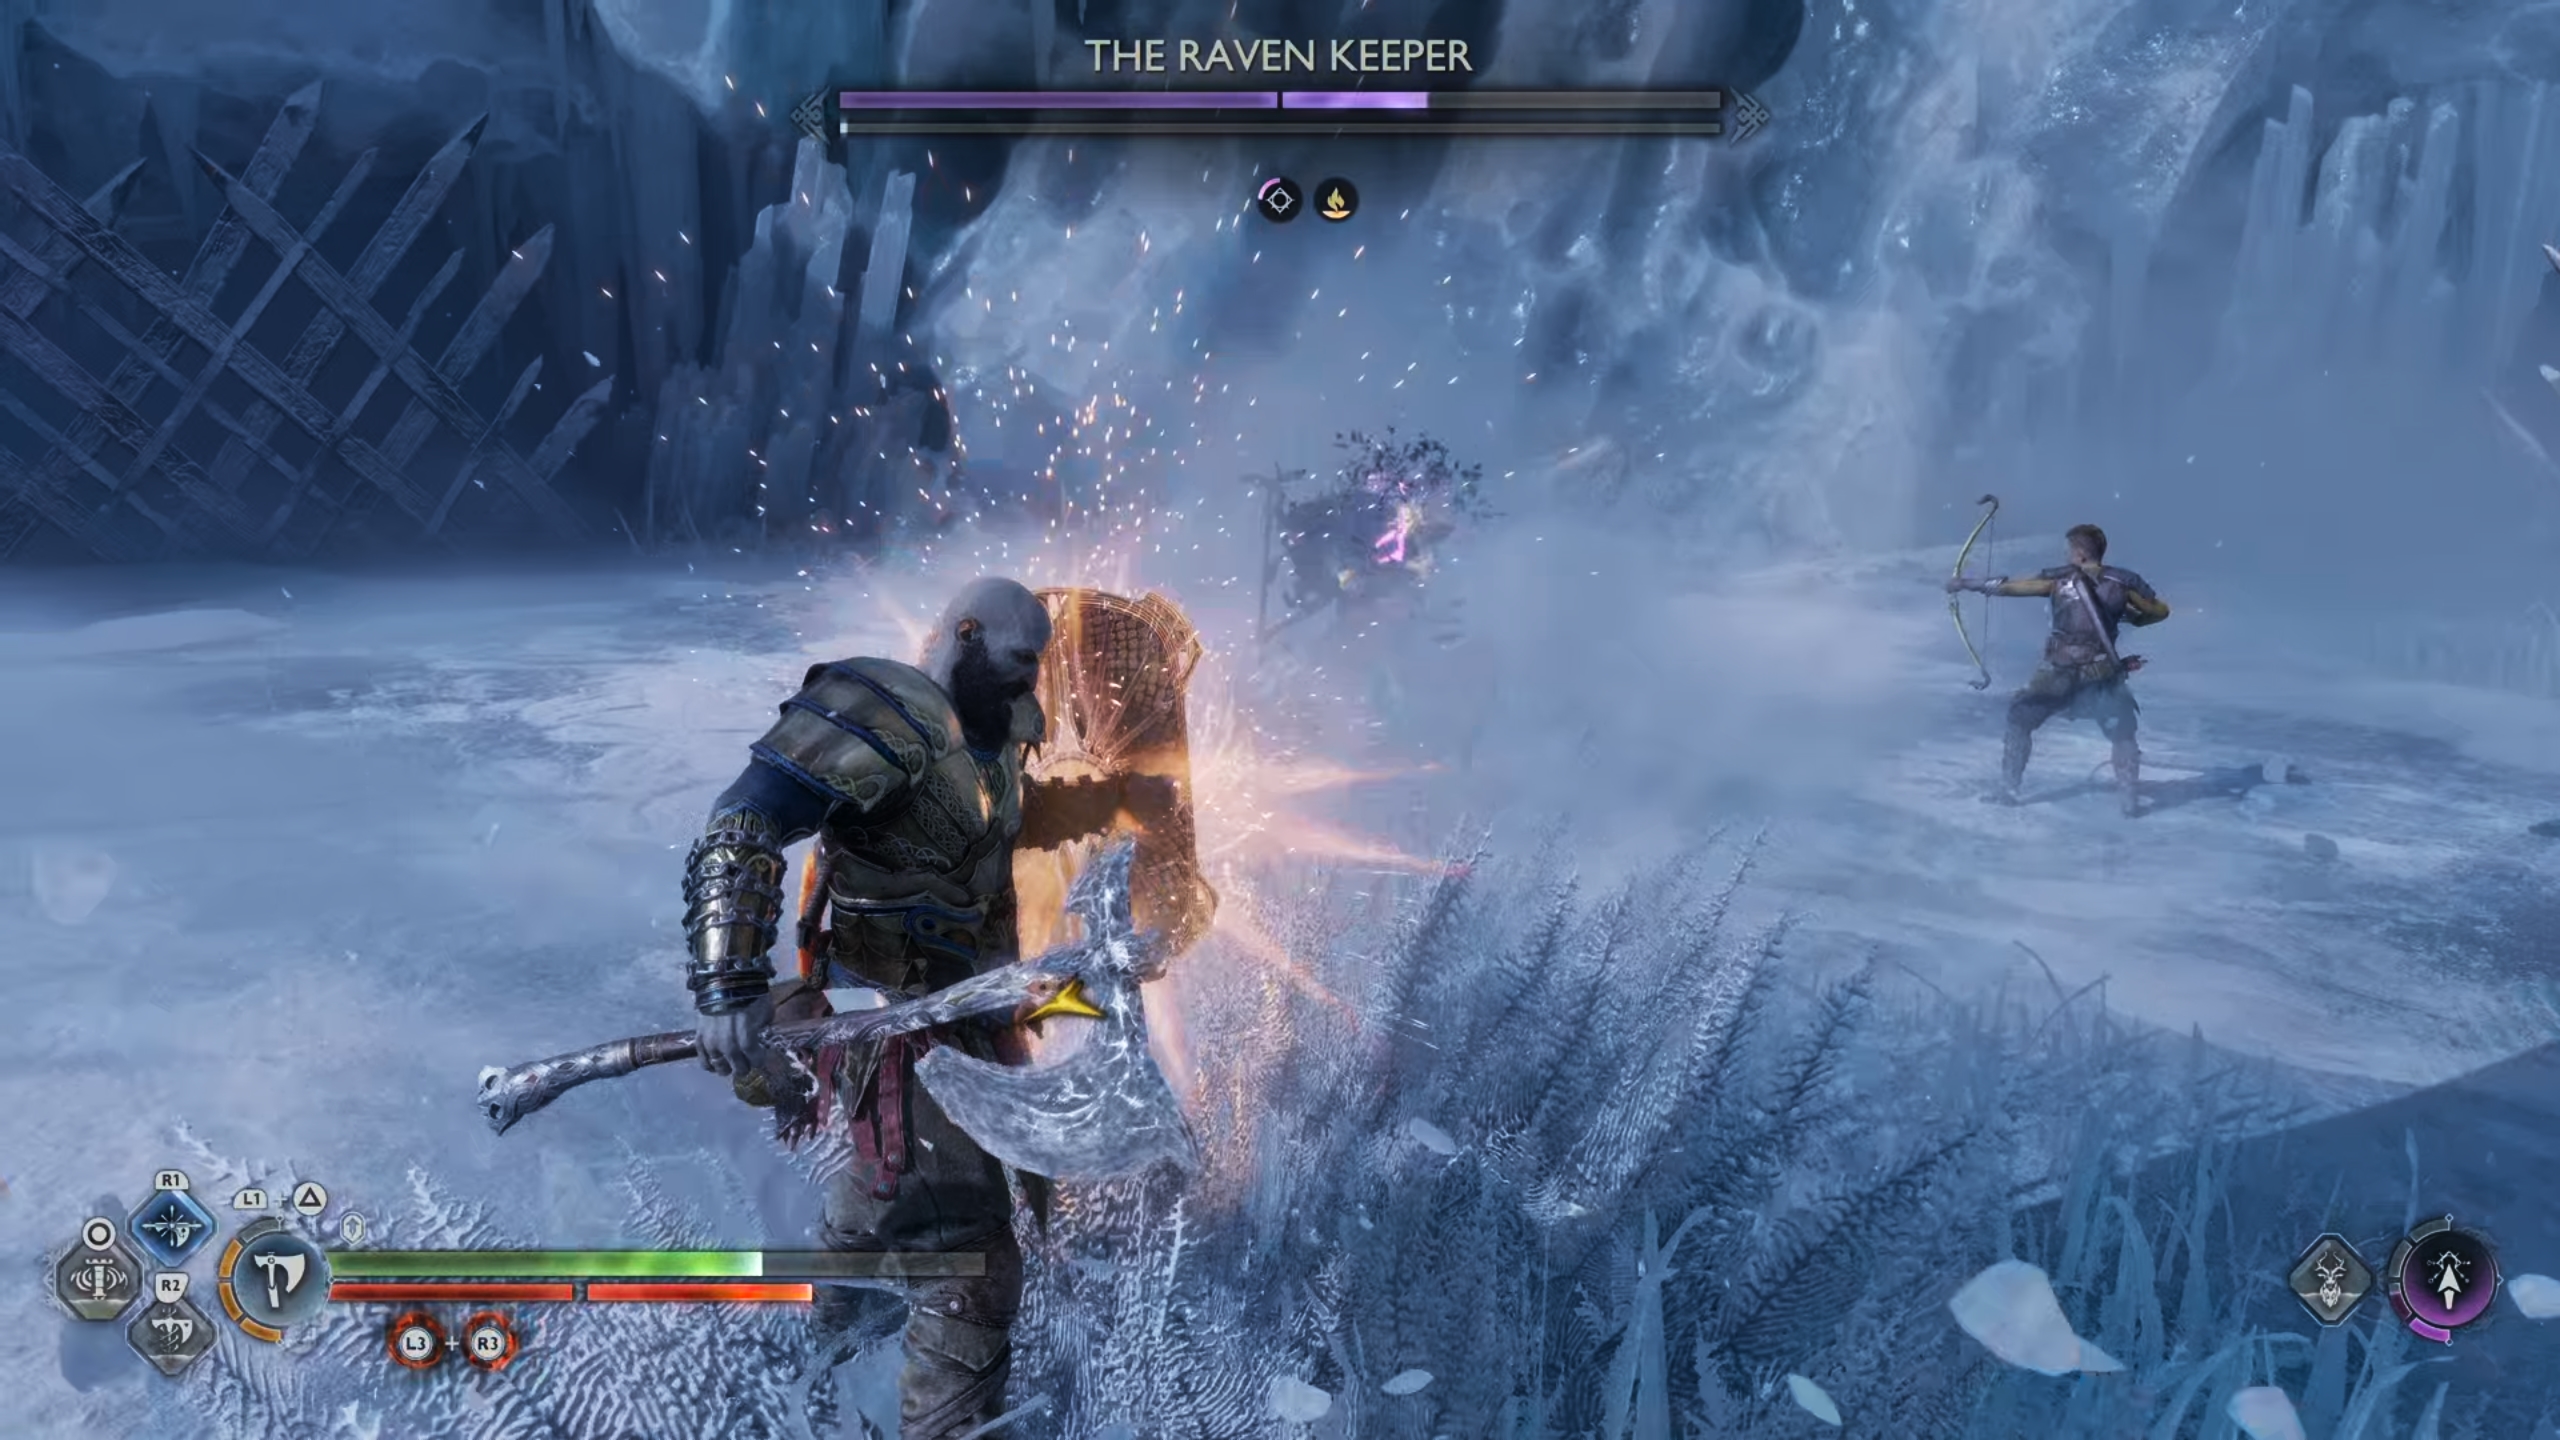 You can block or parry the Ice Wall attack easily, but dodging works too.